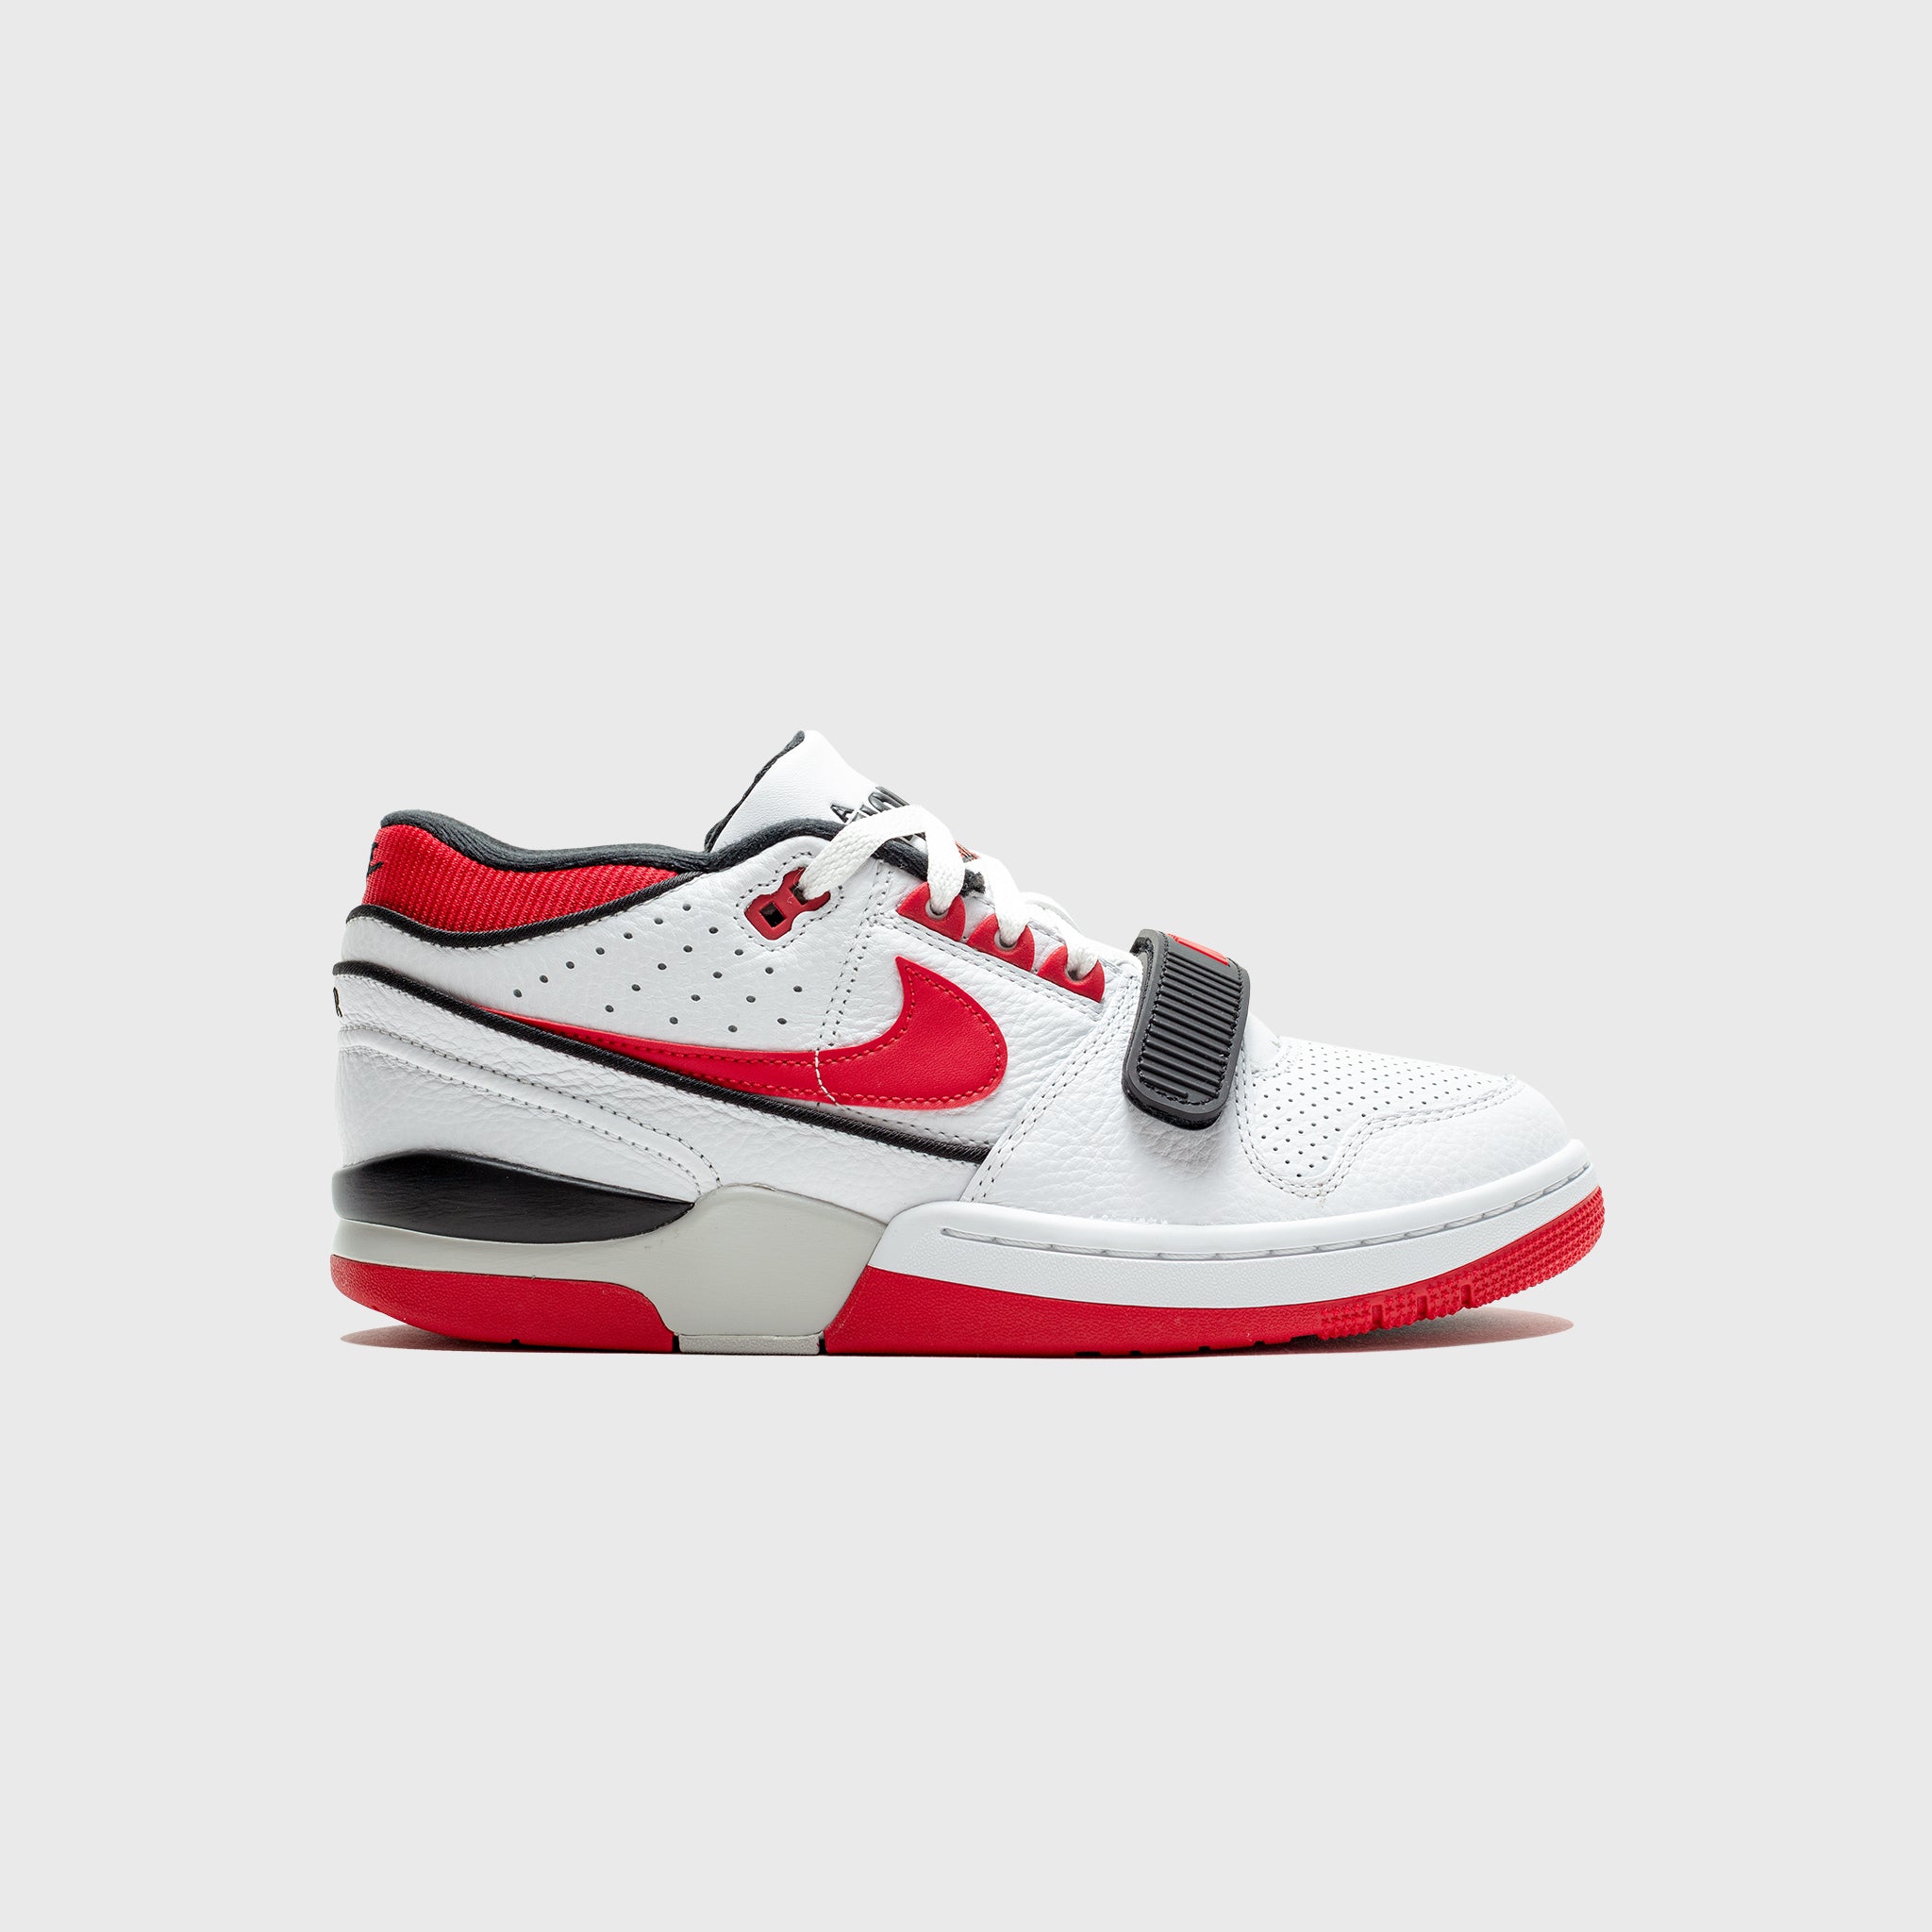 AIR ALPHA FORCE 88 "UNIVERSITY RED"